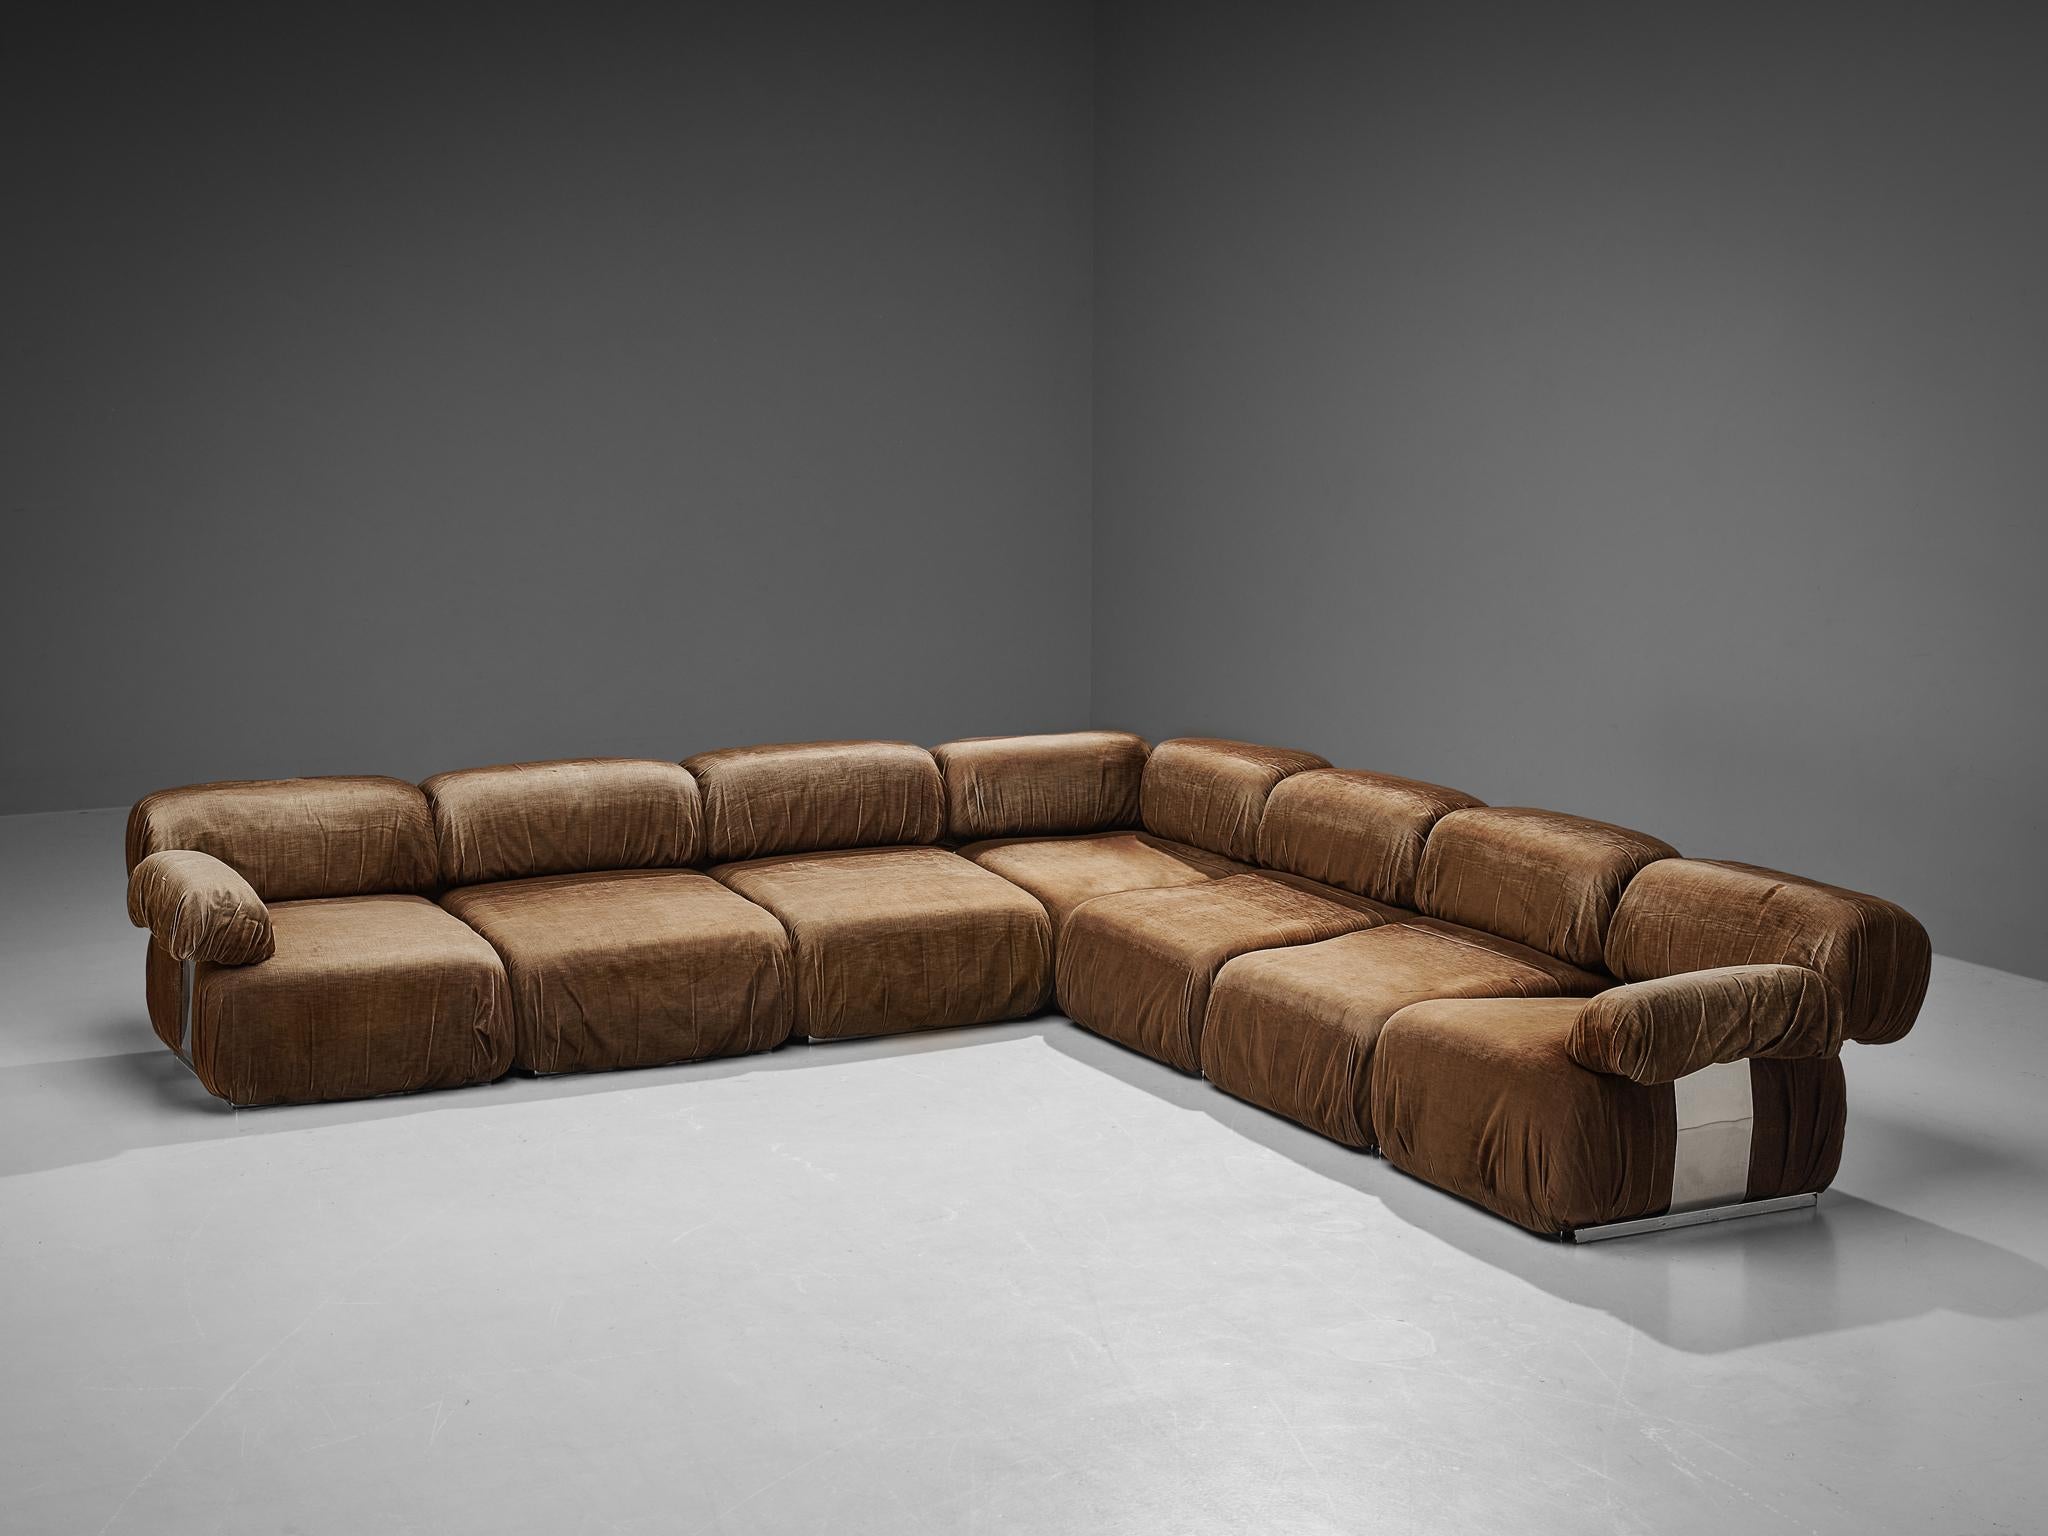 Roberto Iera for Felice Rossi, sectional sofa, brown fabric upholstery, stainless steel, chrome, Italy, 1970s

This large and impressive sectional sofa named 'Il Colombaccio' was designed by Roberto Iera for Felice Rossi. The Italian manufacturer